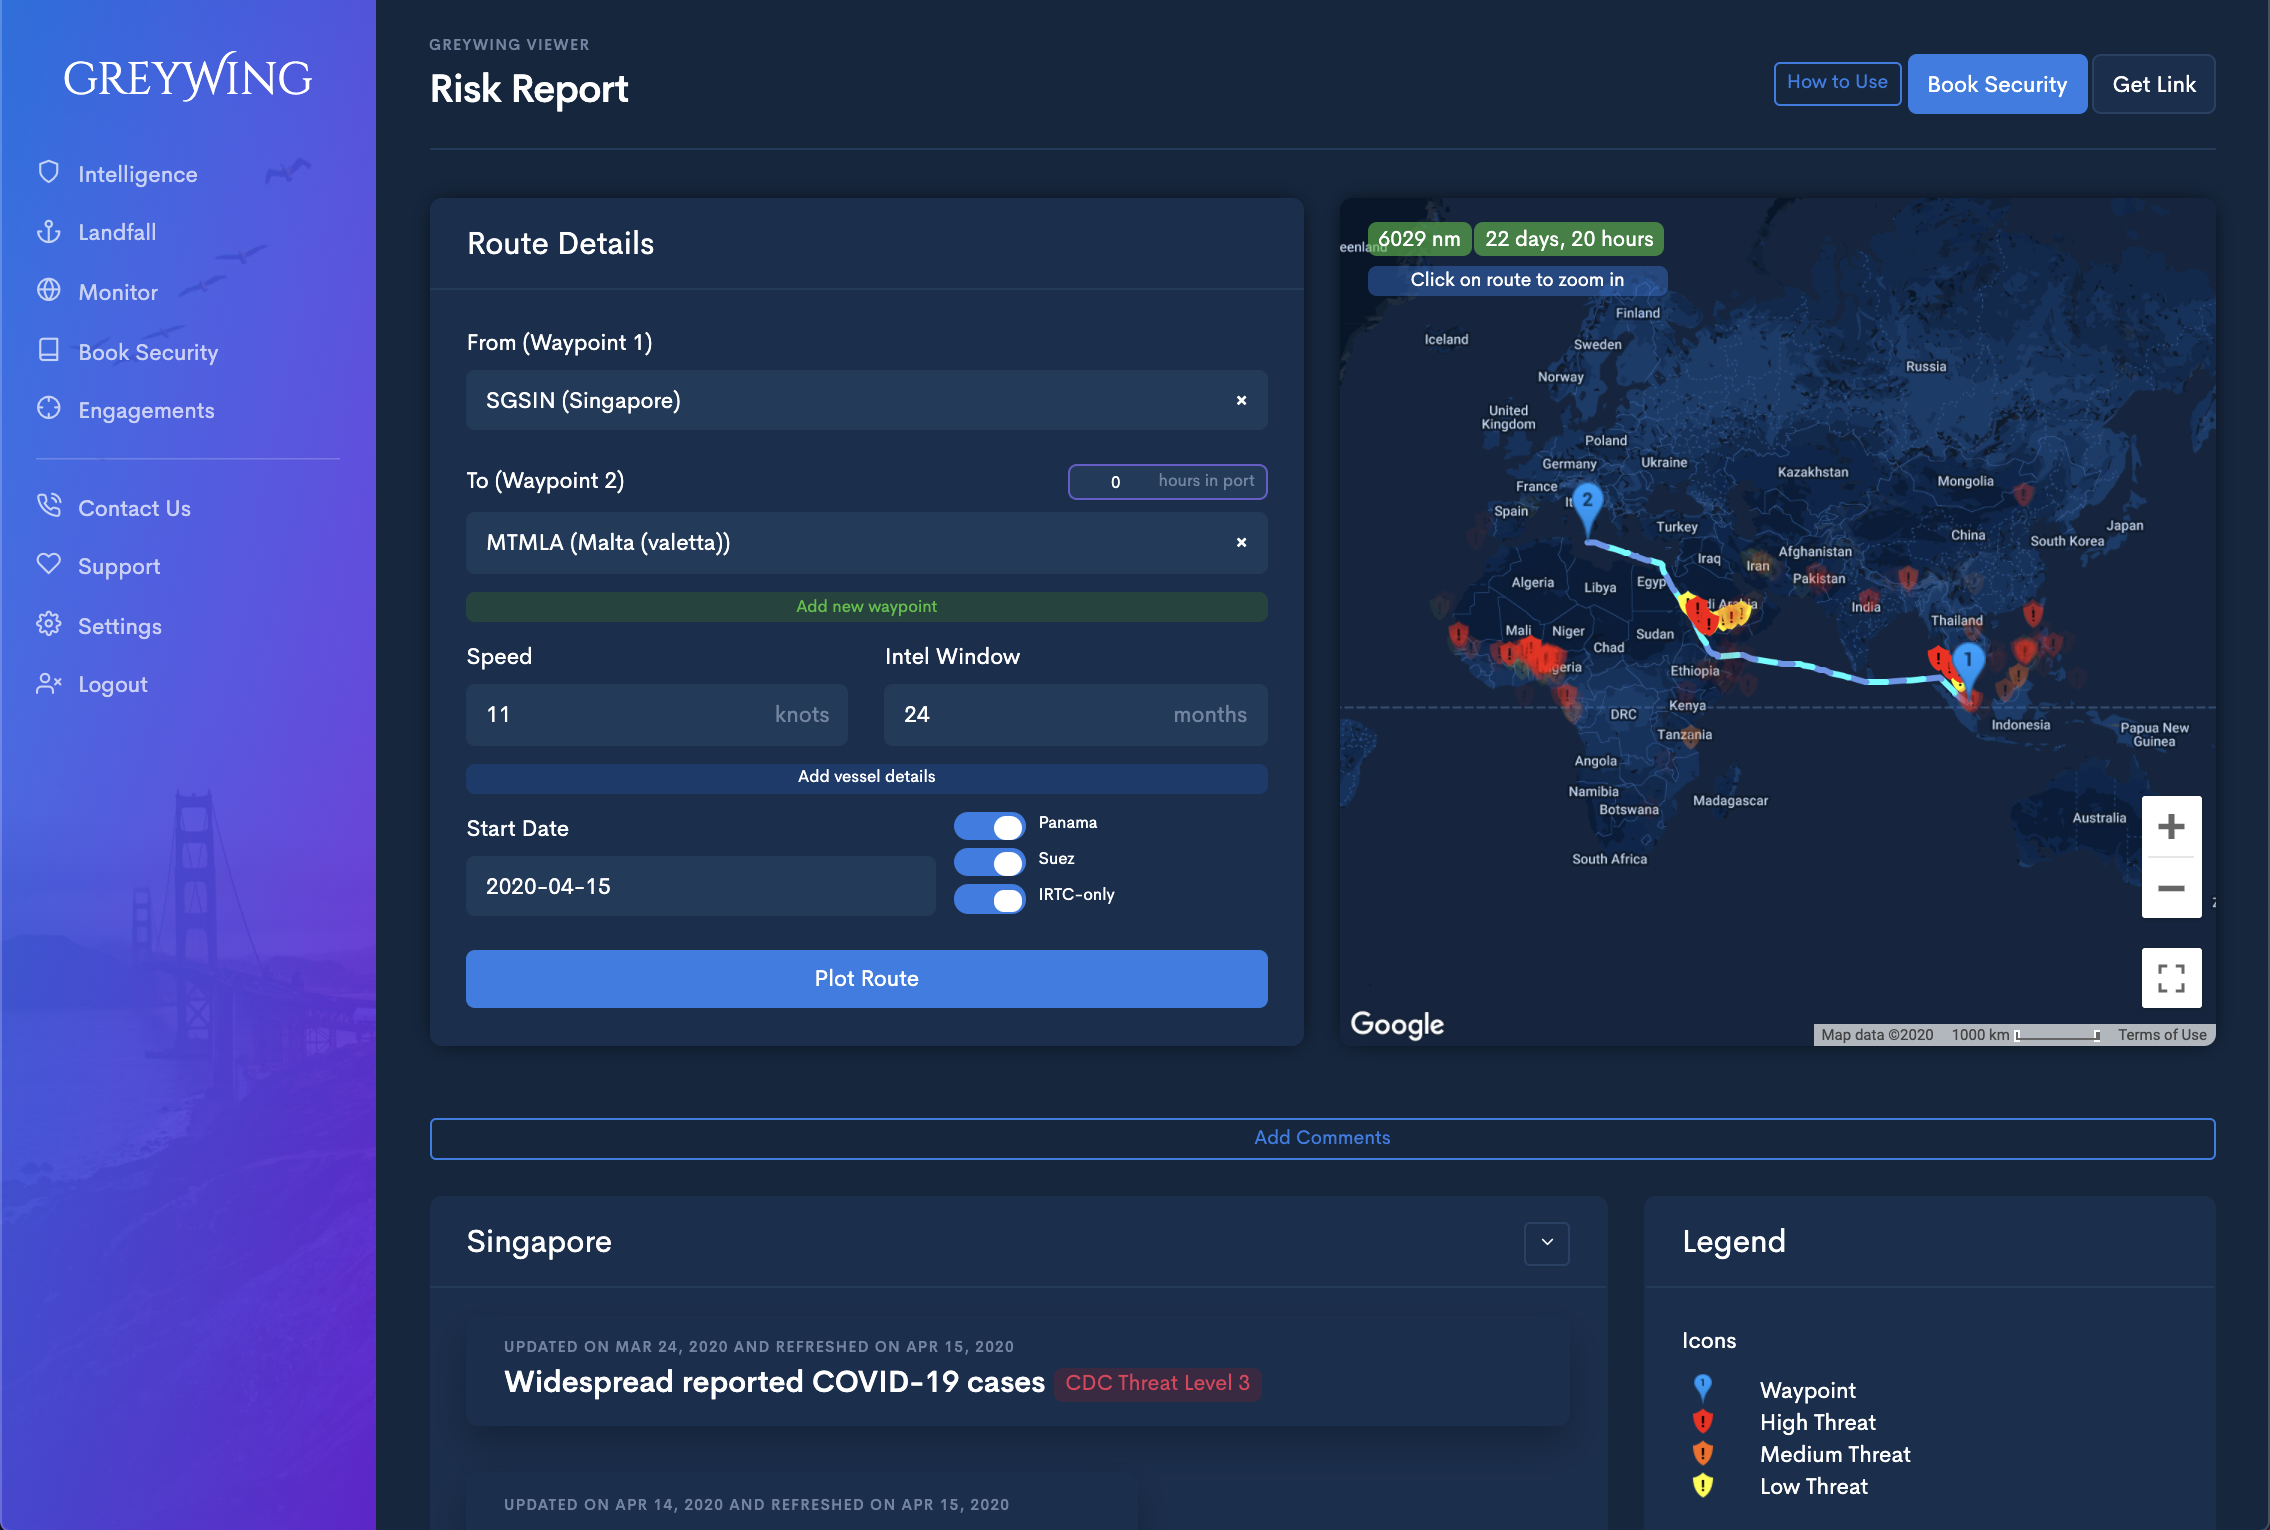 Greywing's risk report dashboard